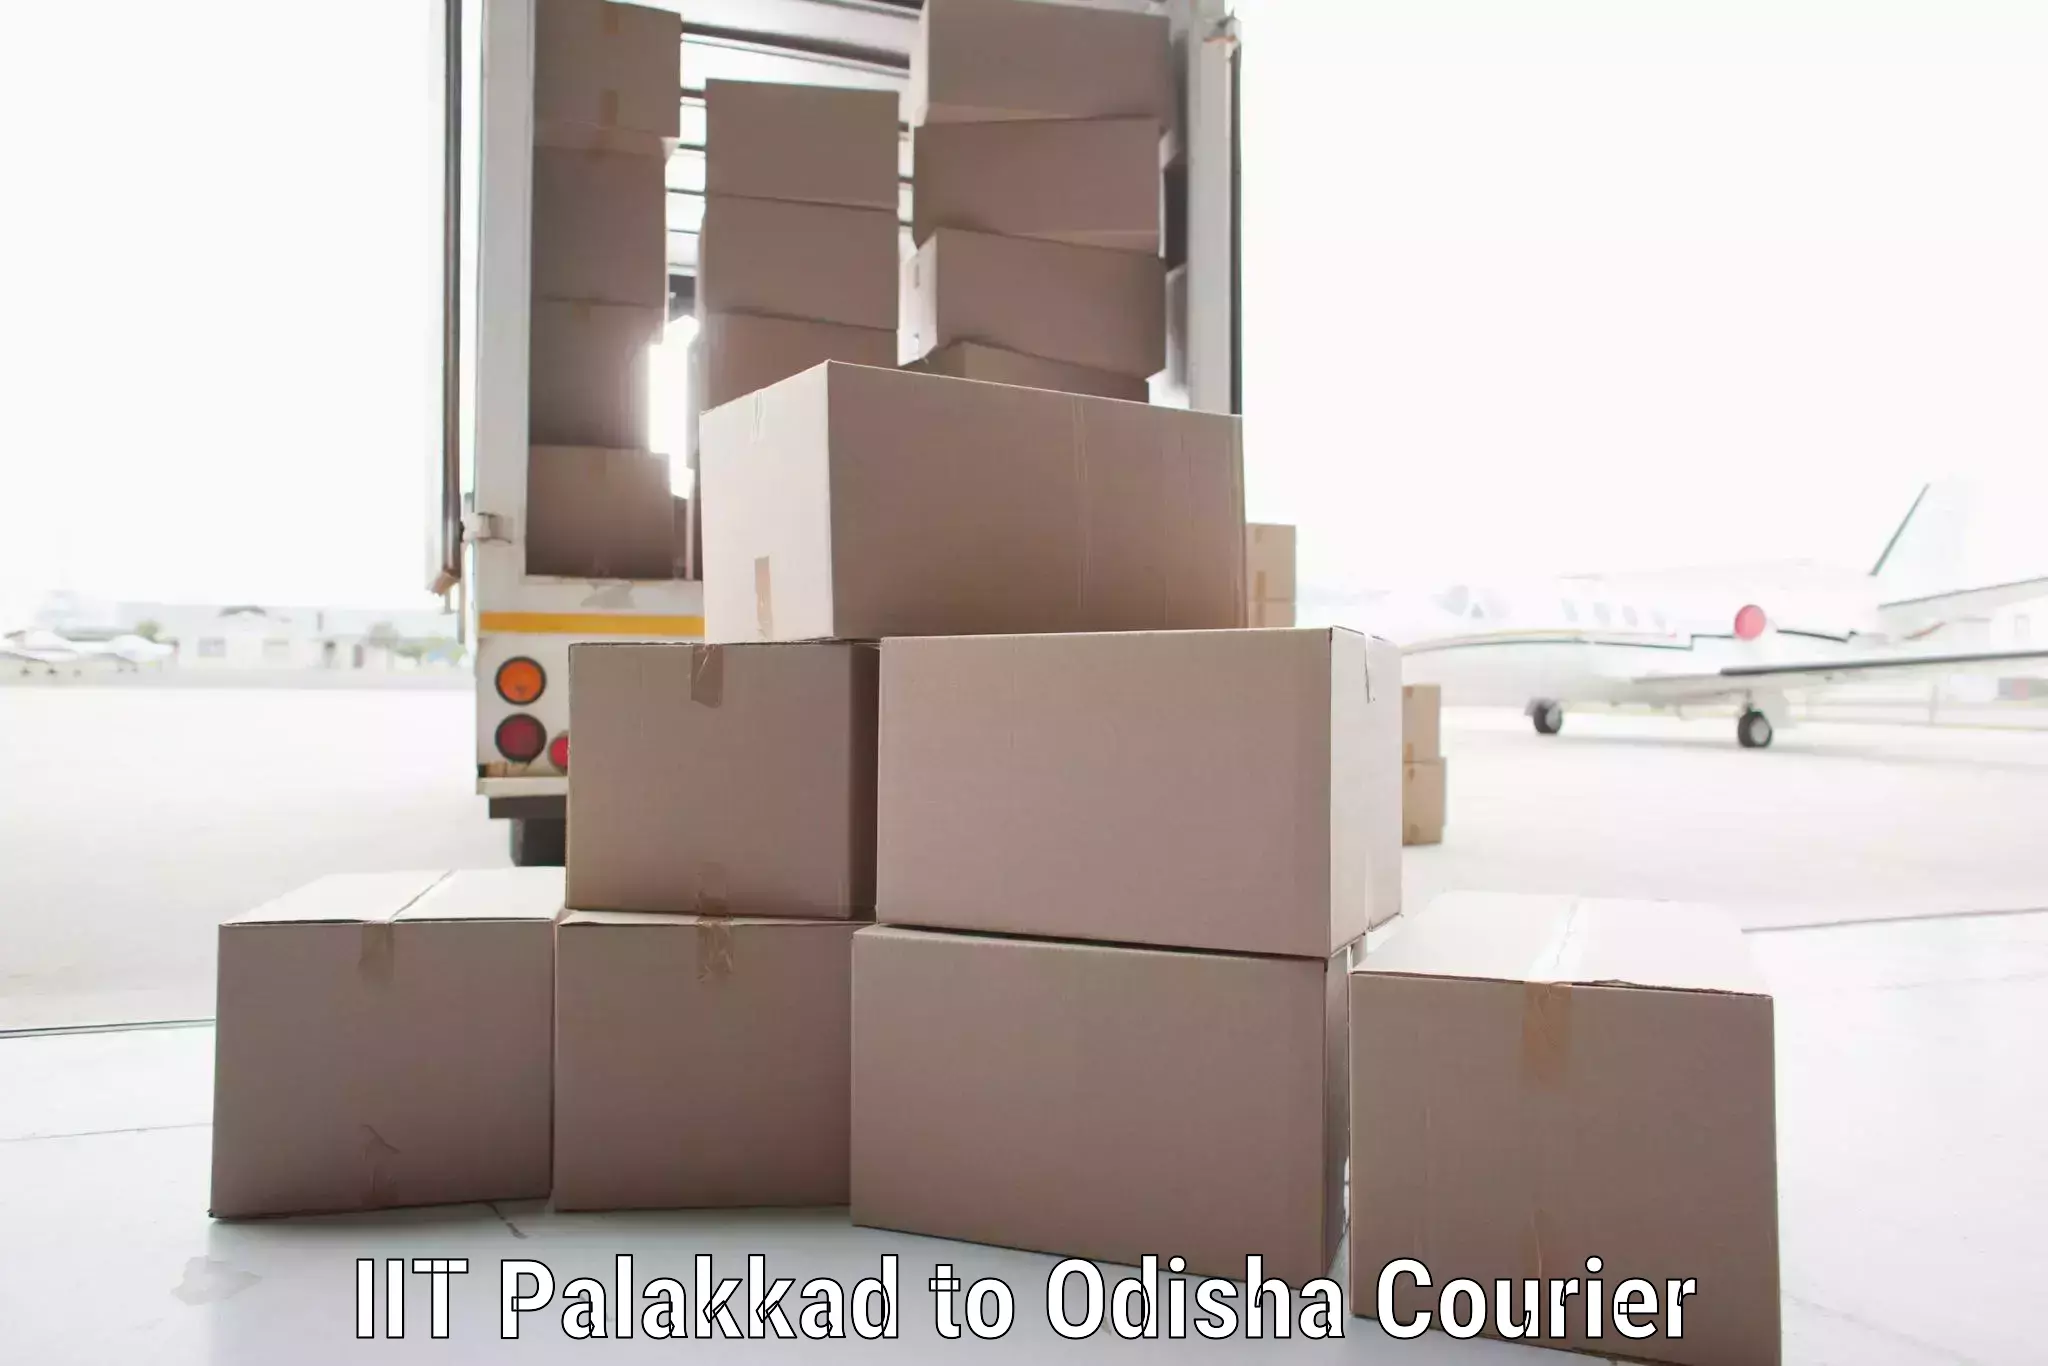 Affordable parcel service IIT Palakkad to Cuttack